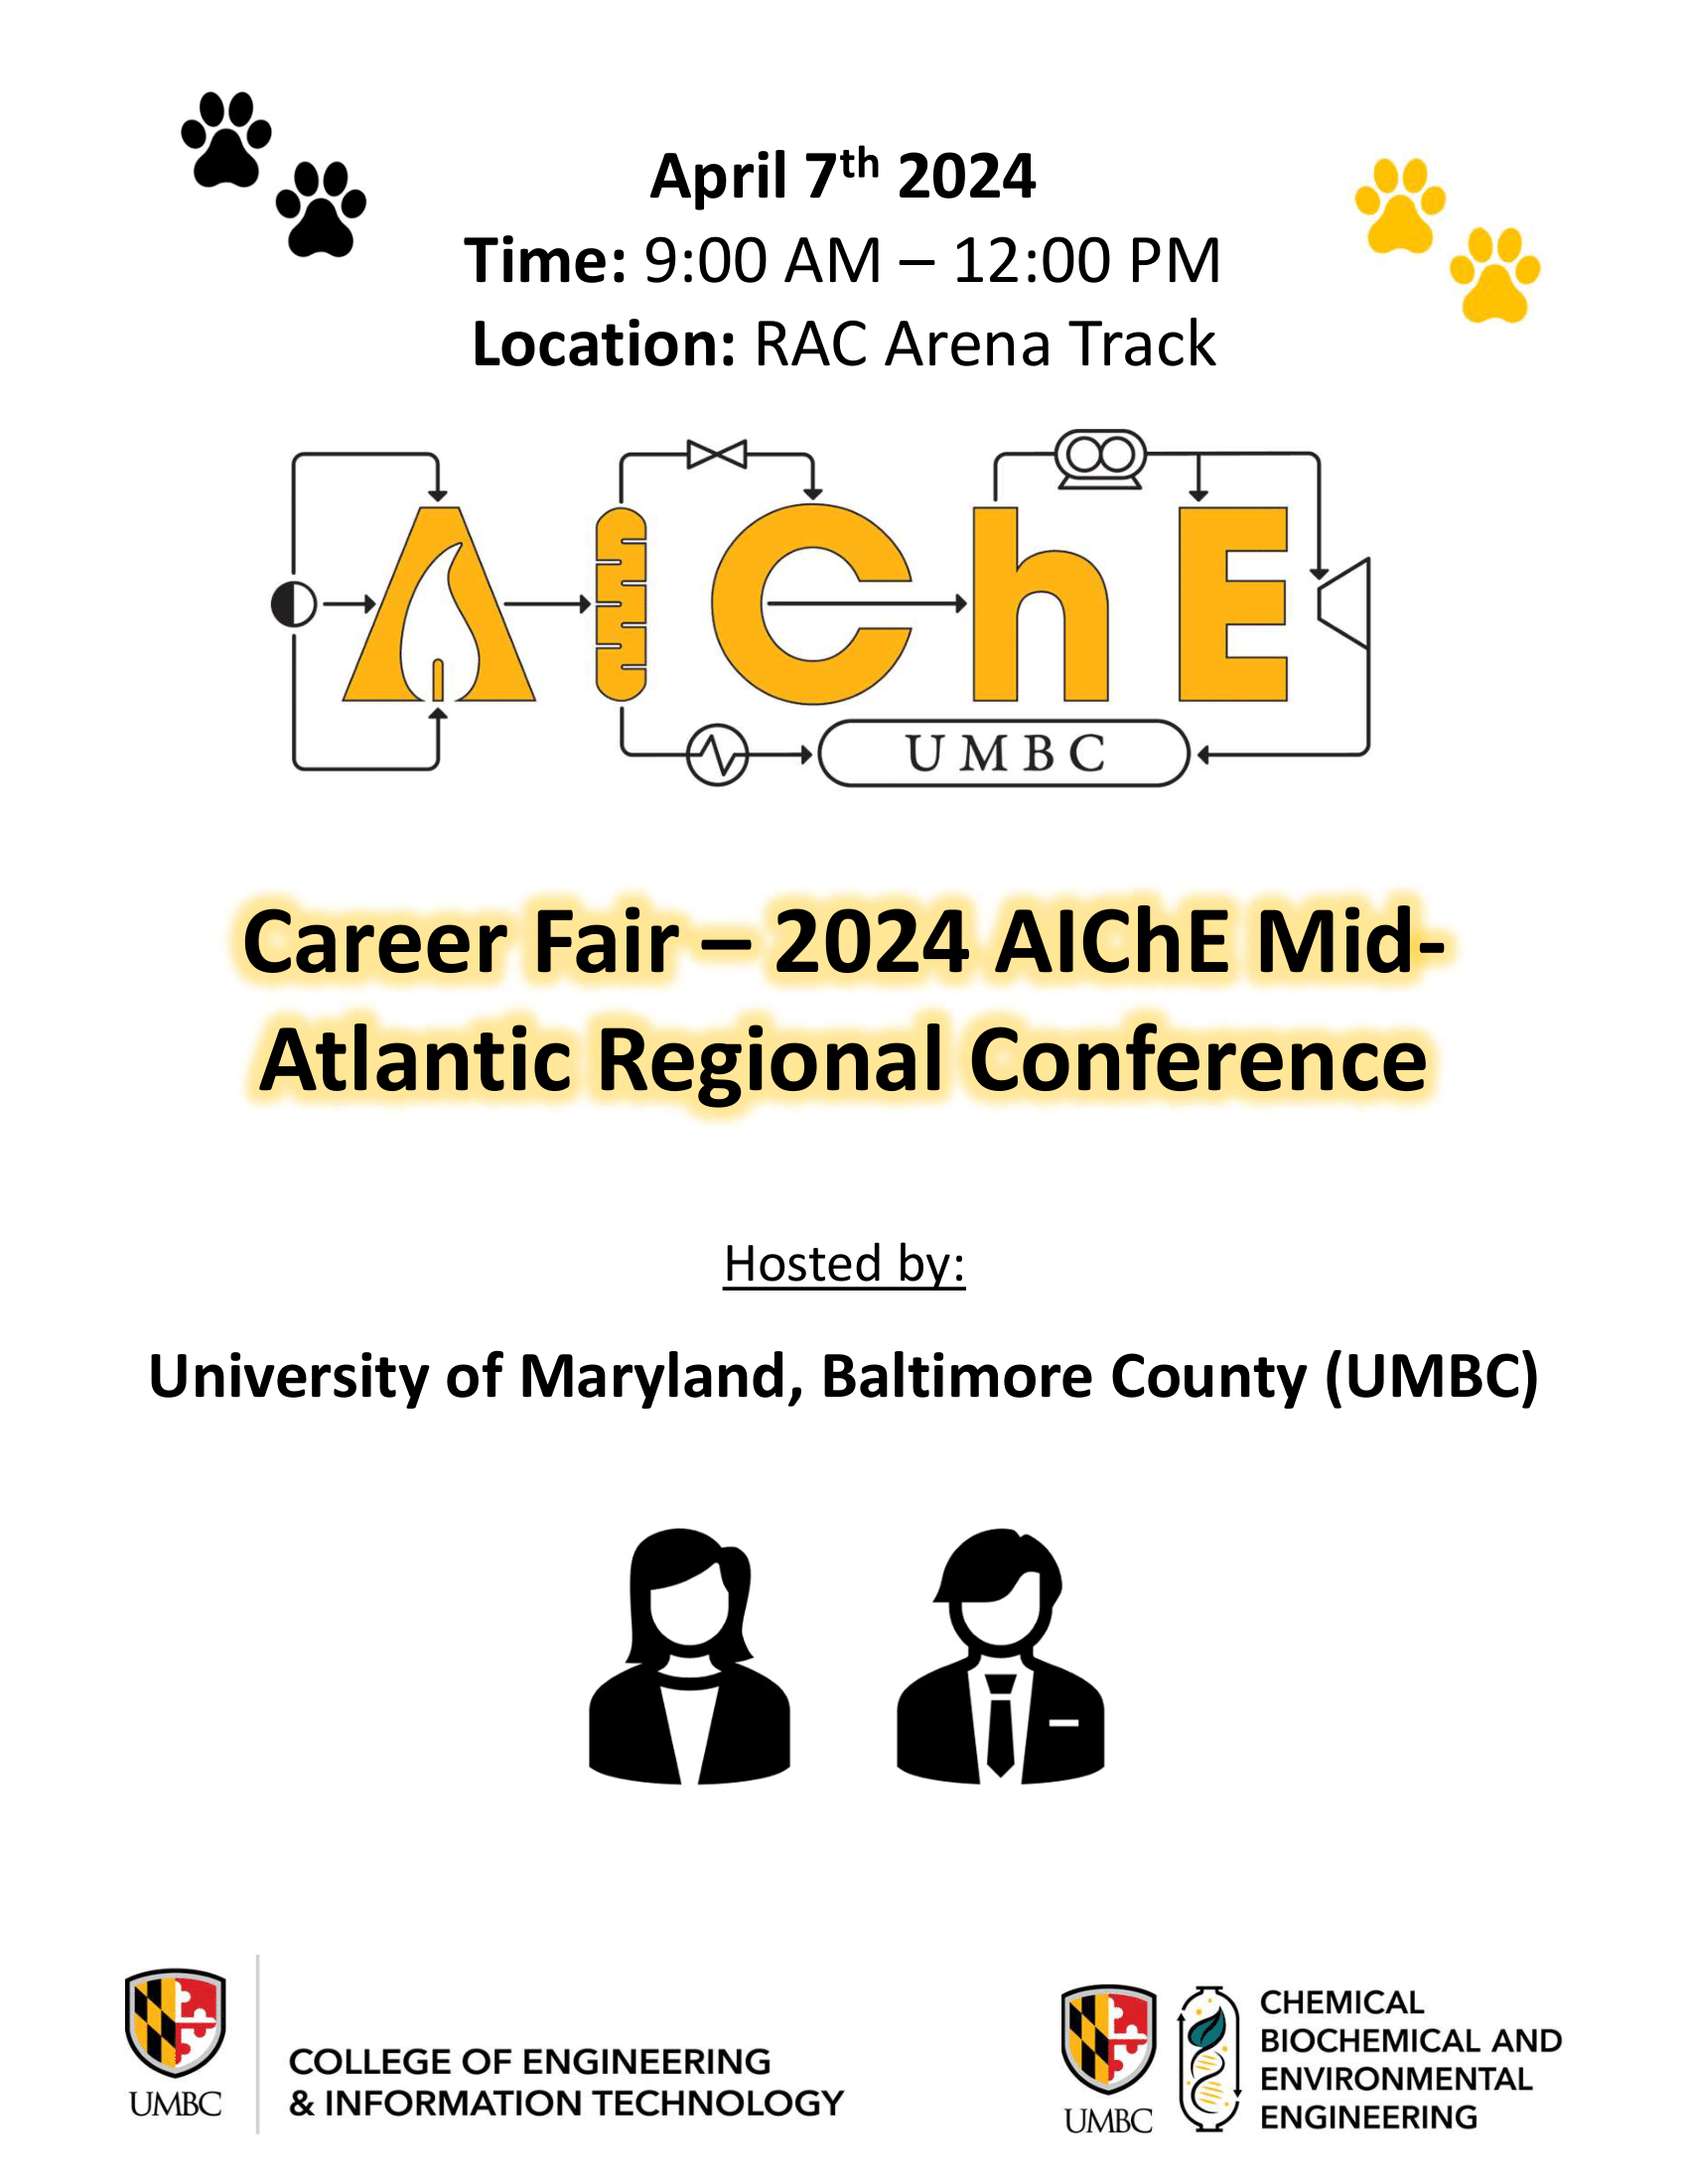 Conference Career Fair